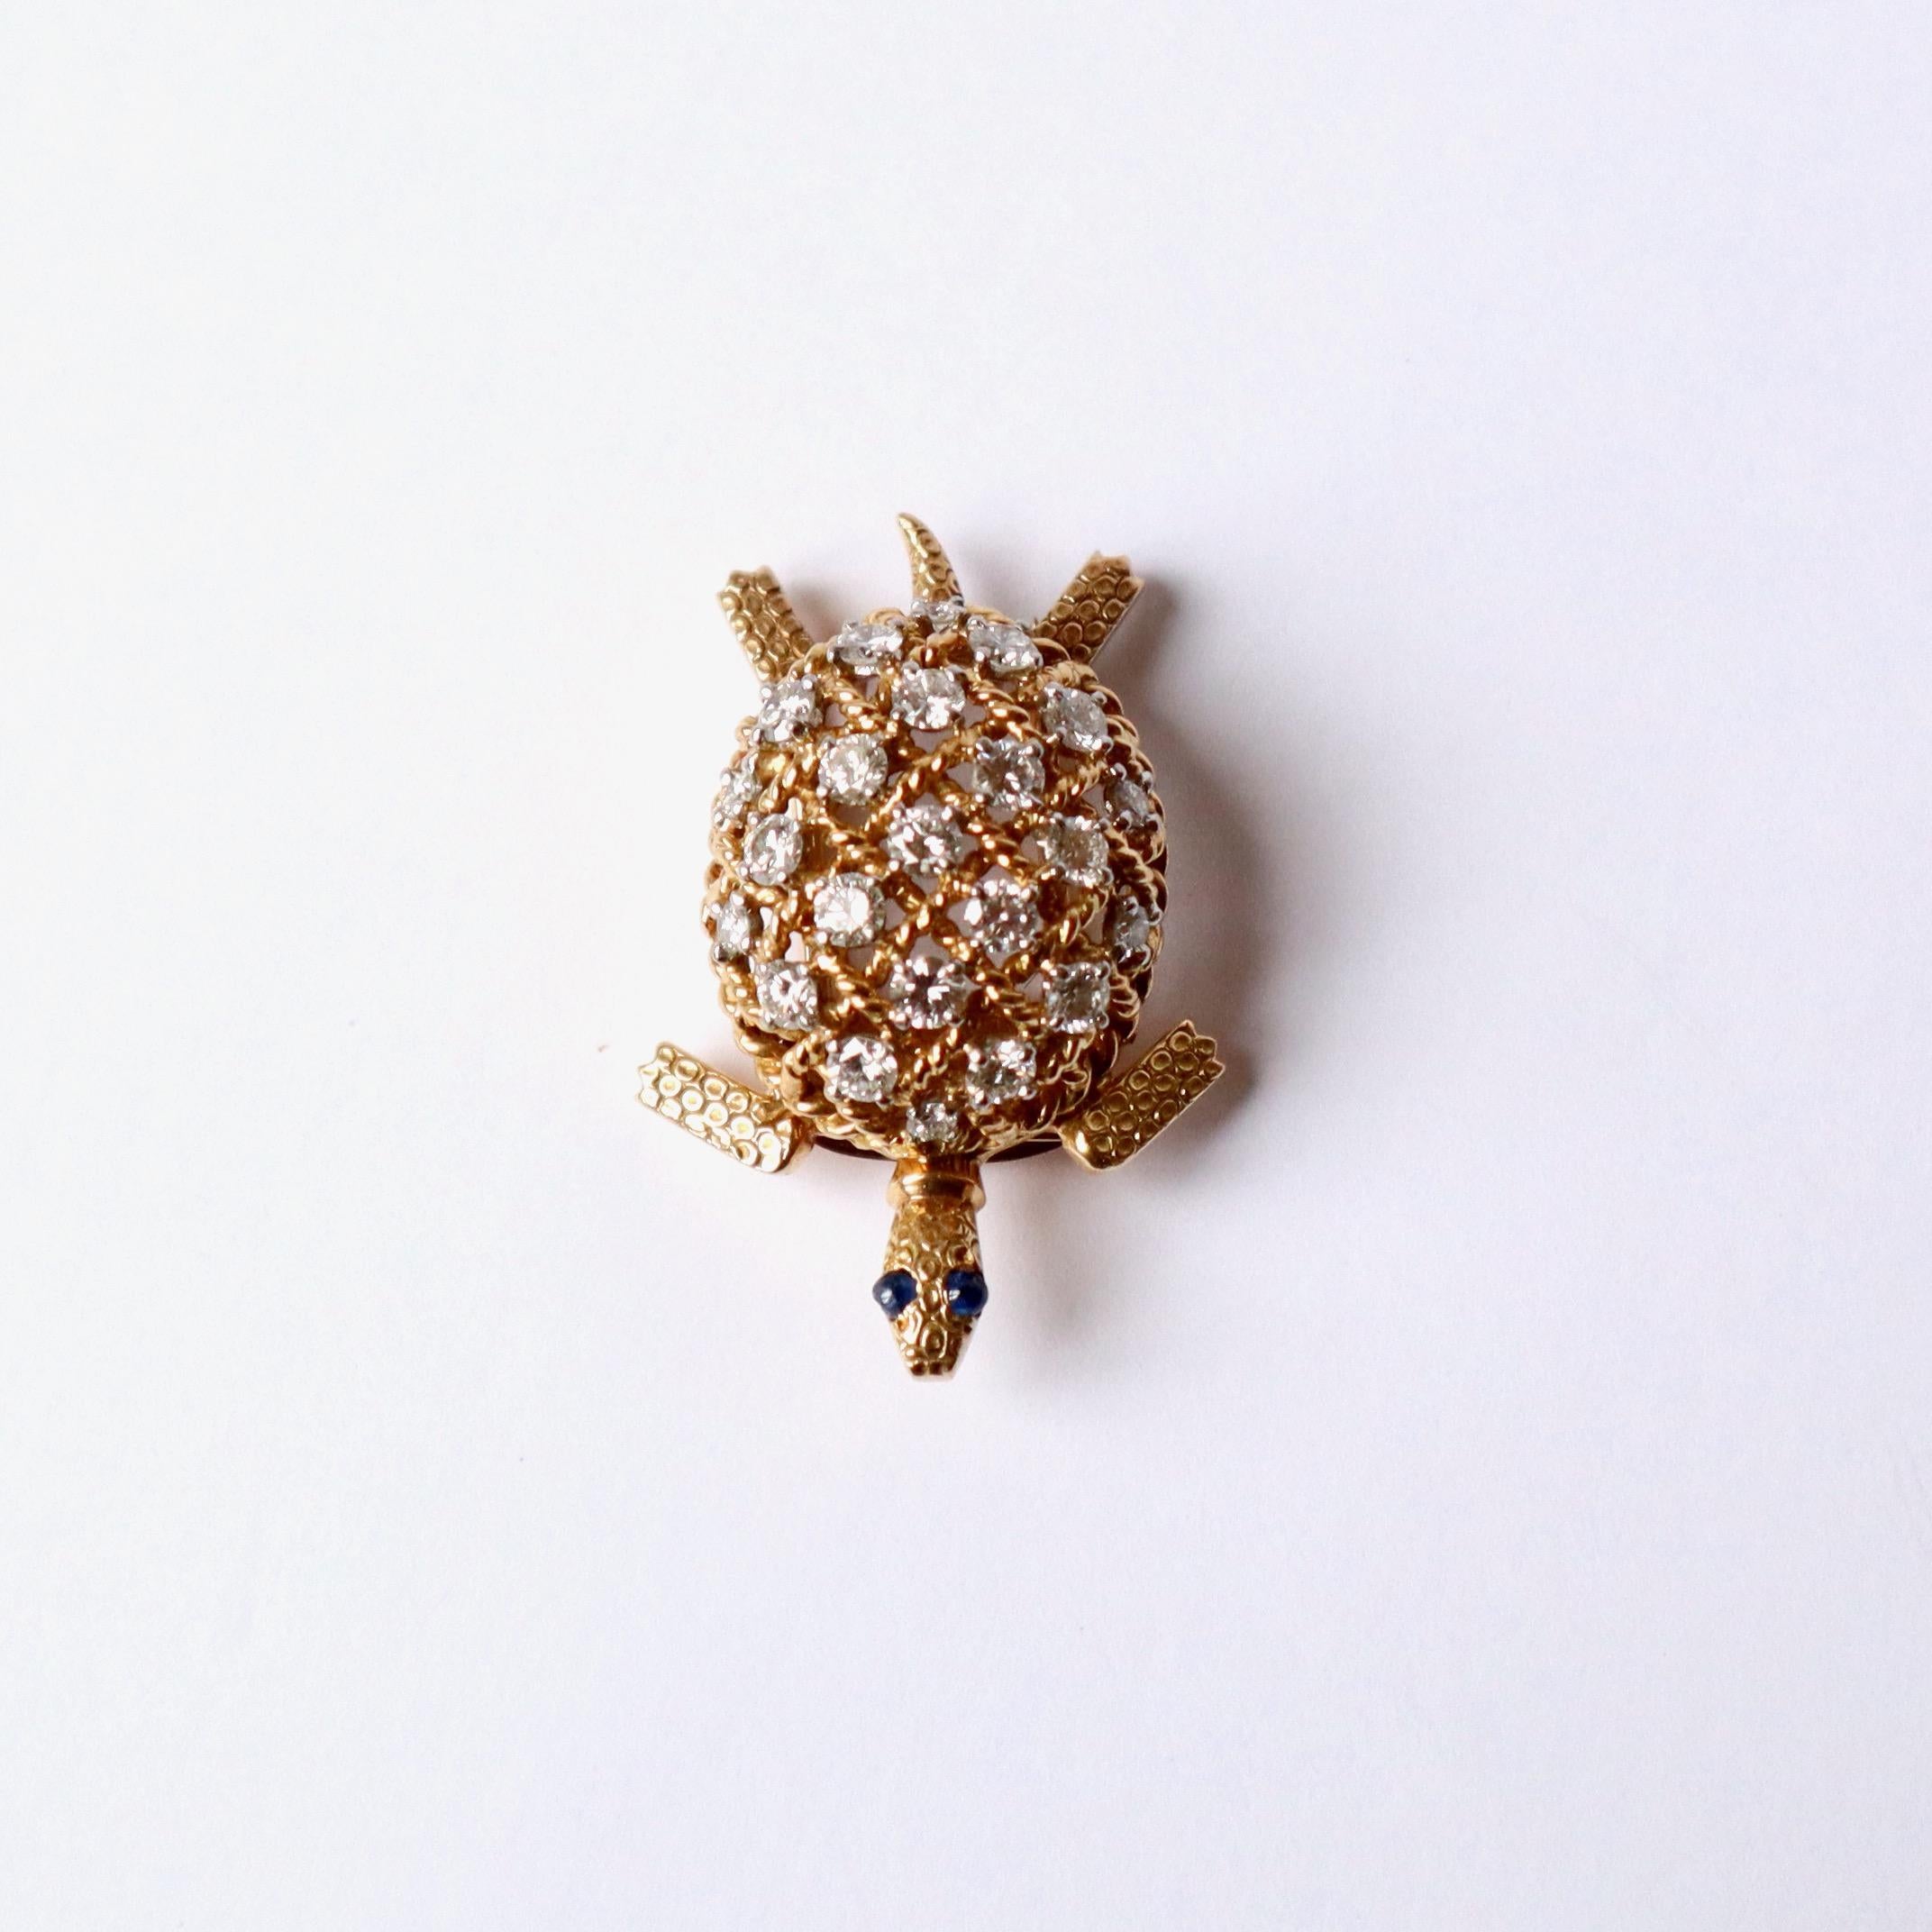 CARTIER Lapel clip brooch in 18K 750‰ yellow gold, representing a turtle whose carapace in grating of twisted gold threads is set with brilliant-cut diamonds. Eyes adorned with cabochon sapphires. 18K 750‰ yellow gold pins with toggle safety system.